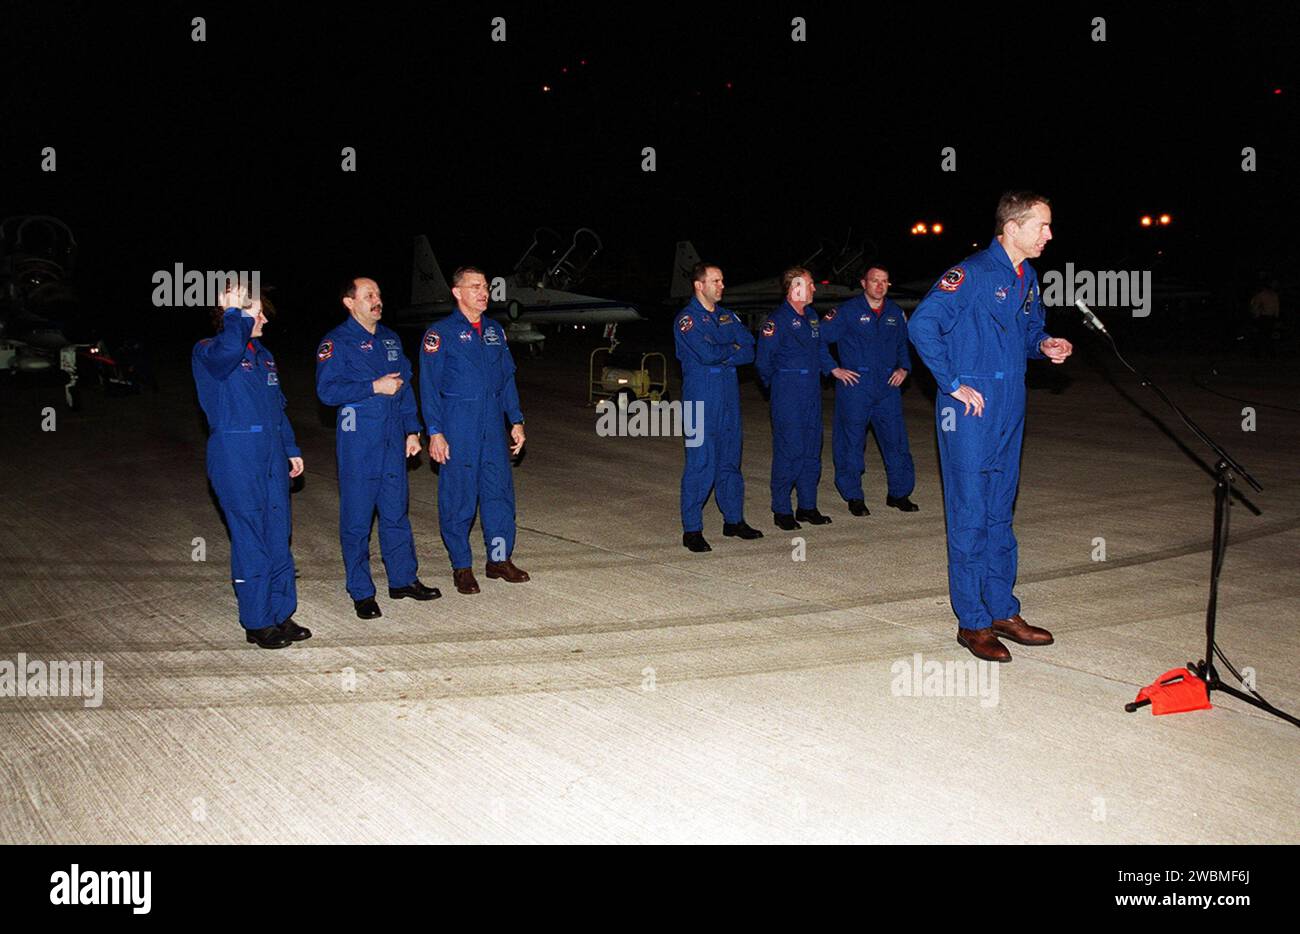 After landing at KSC’s Shuttle Landing Facility, the STS-102 crew pauses to brief the media. At the microphone is Commander James Wetherbee. Standing behind him (left to right) are Missions Specialists Susan Helms, Yury Usachev and James Voss, who are also the Expedition Two crew due to replace Expedition One on the International Space Station; Mission Specialists Paul Richards and Andrew Thomas; and Pilot James Kelly. STS-102 will be carrying the Multi-Purpose Logistics Module Leonardo, the primary delivery system used to resupply and return Station cargo requiring a pressurized environment. Stock Photo